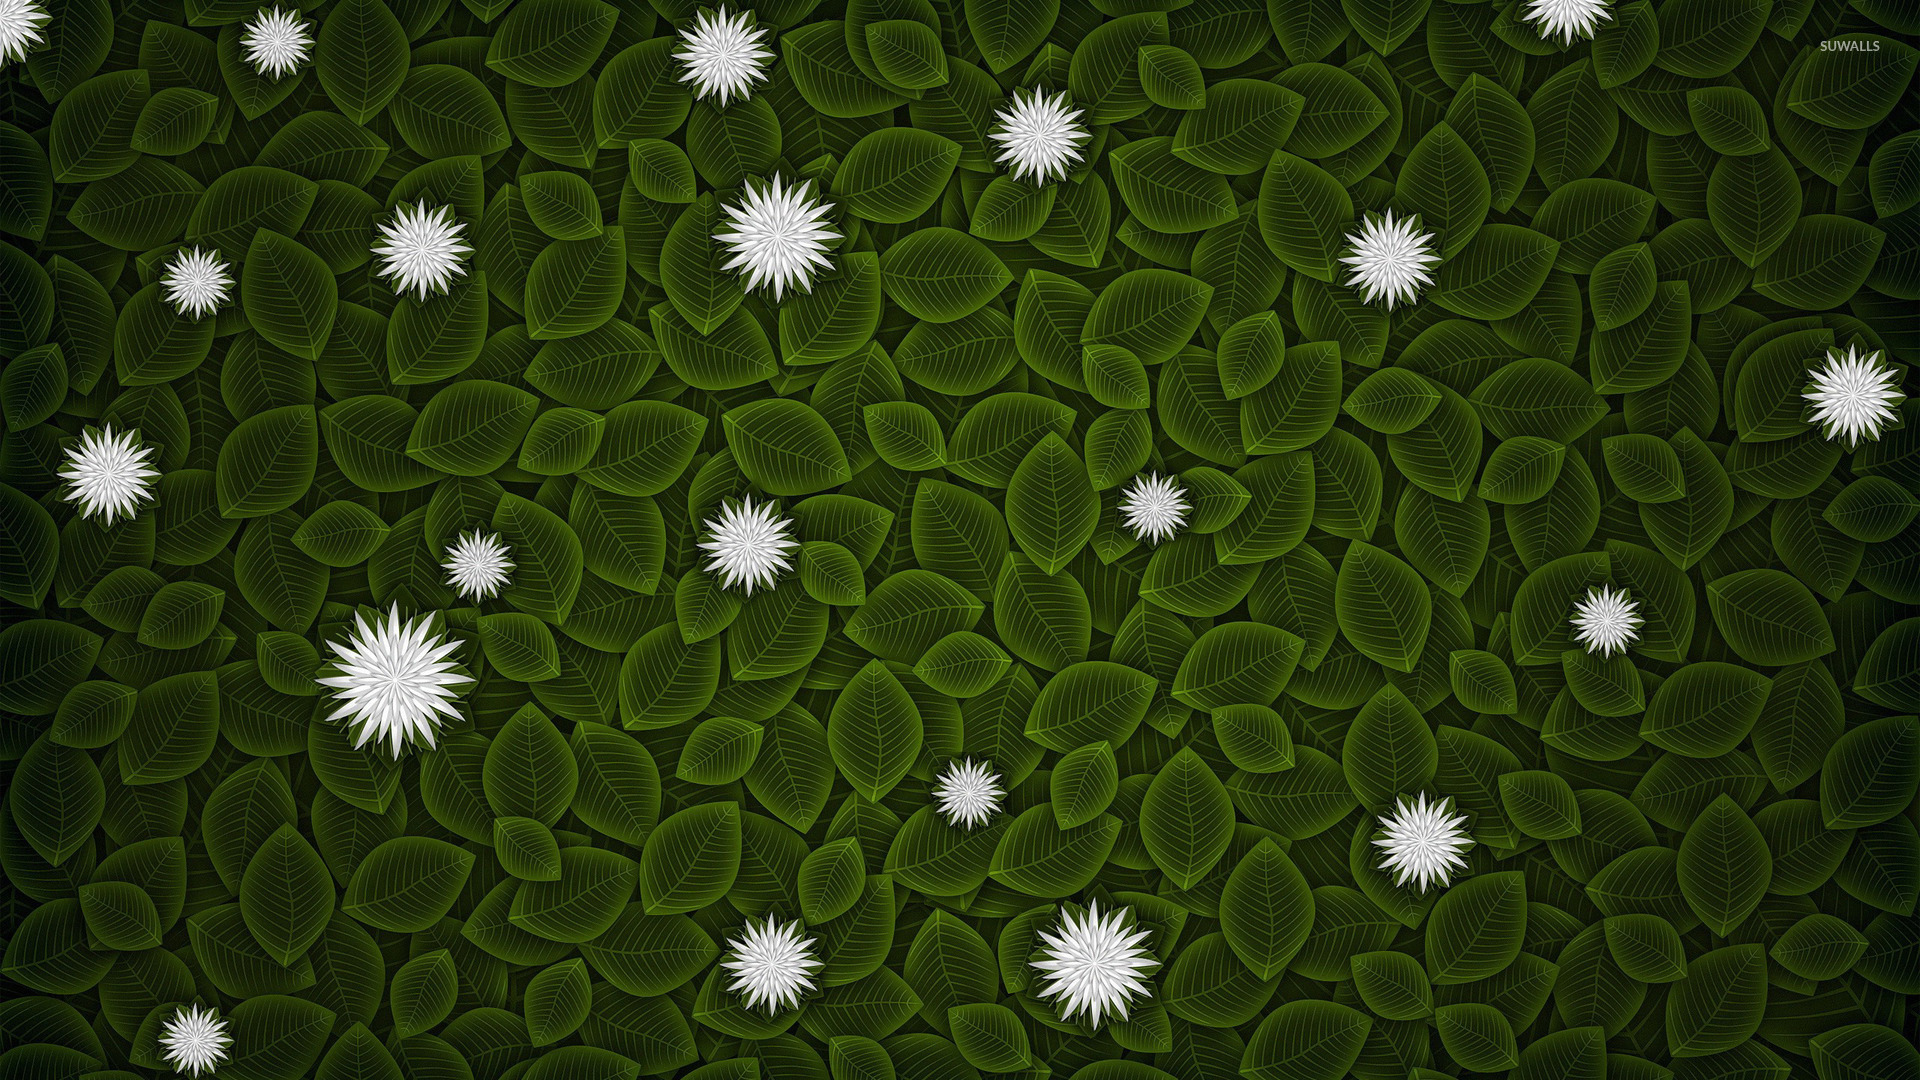 Leaves and flowers wallpaper - Abstract wallpapers - #16854